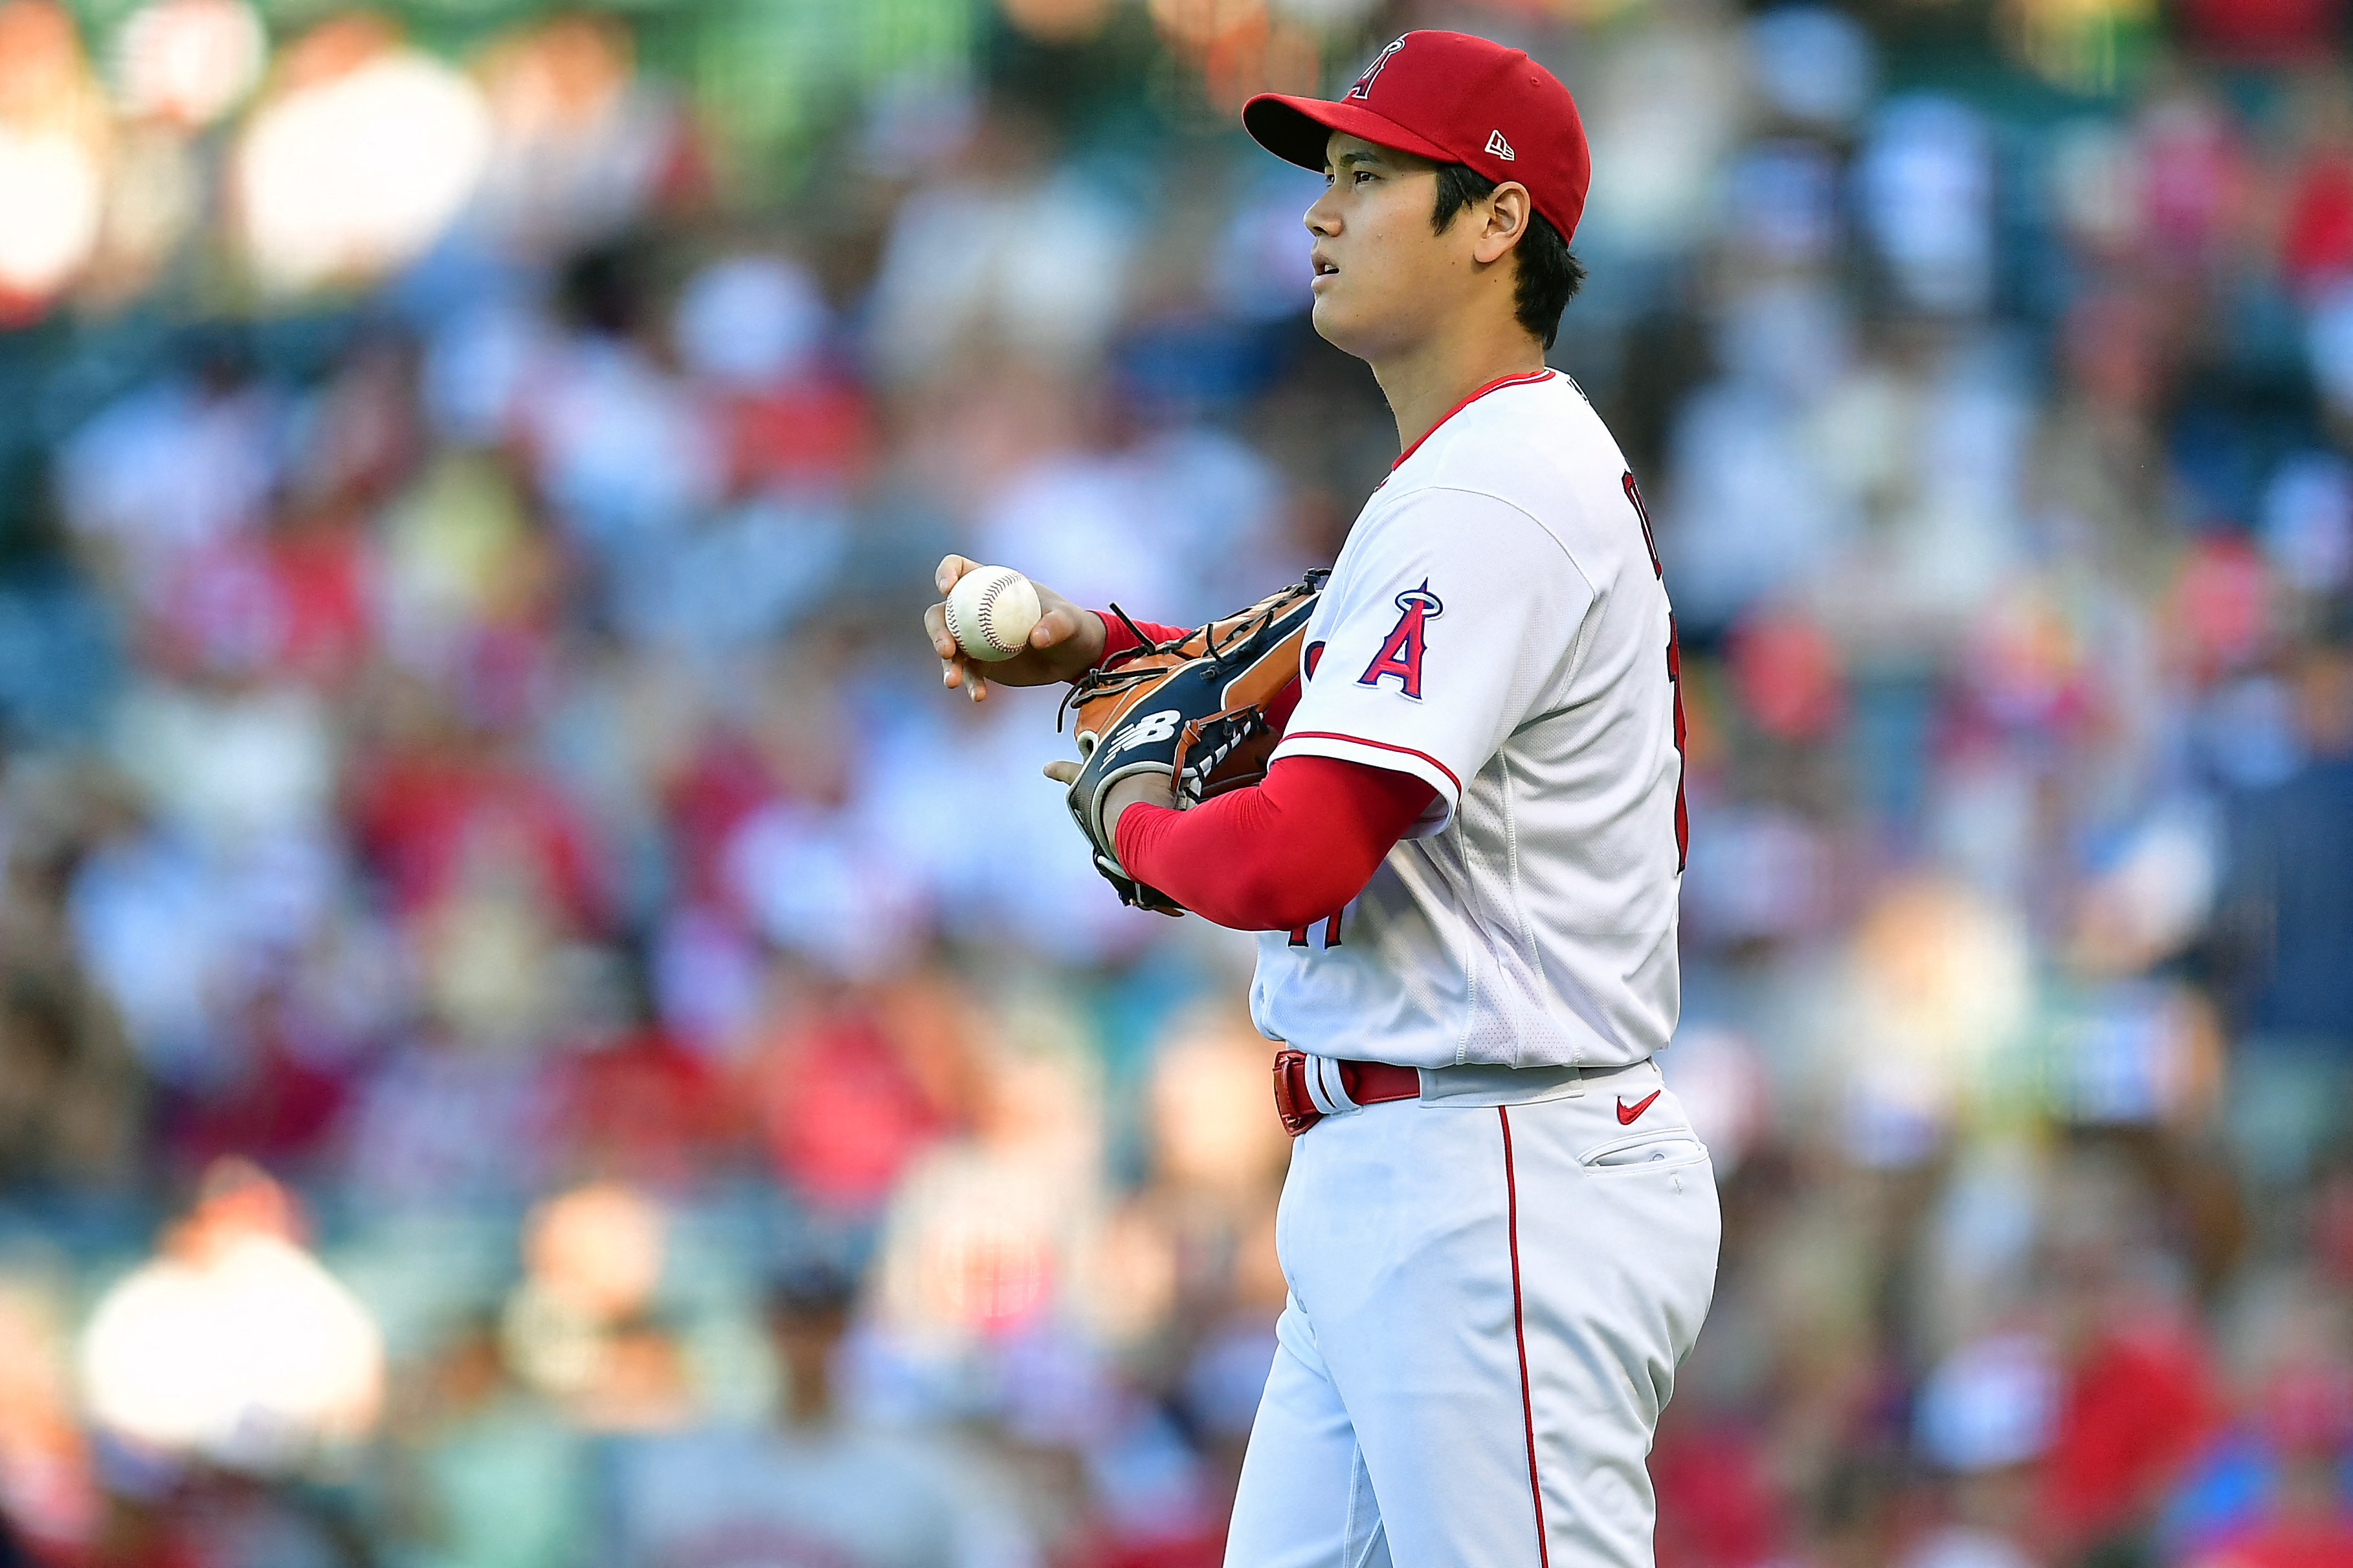 Shohei Ohtani allows 4 earned runs, takes the loss in the Astros